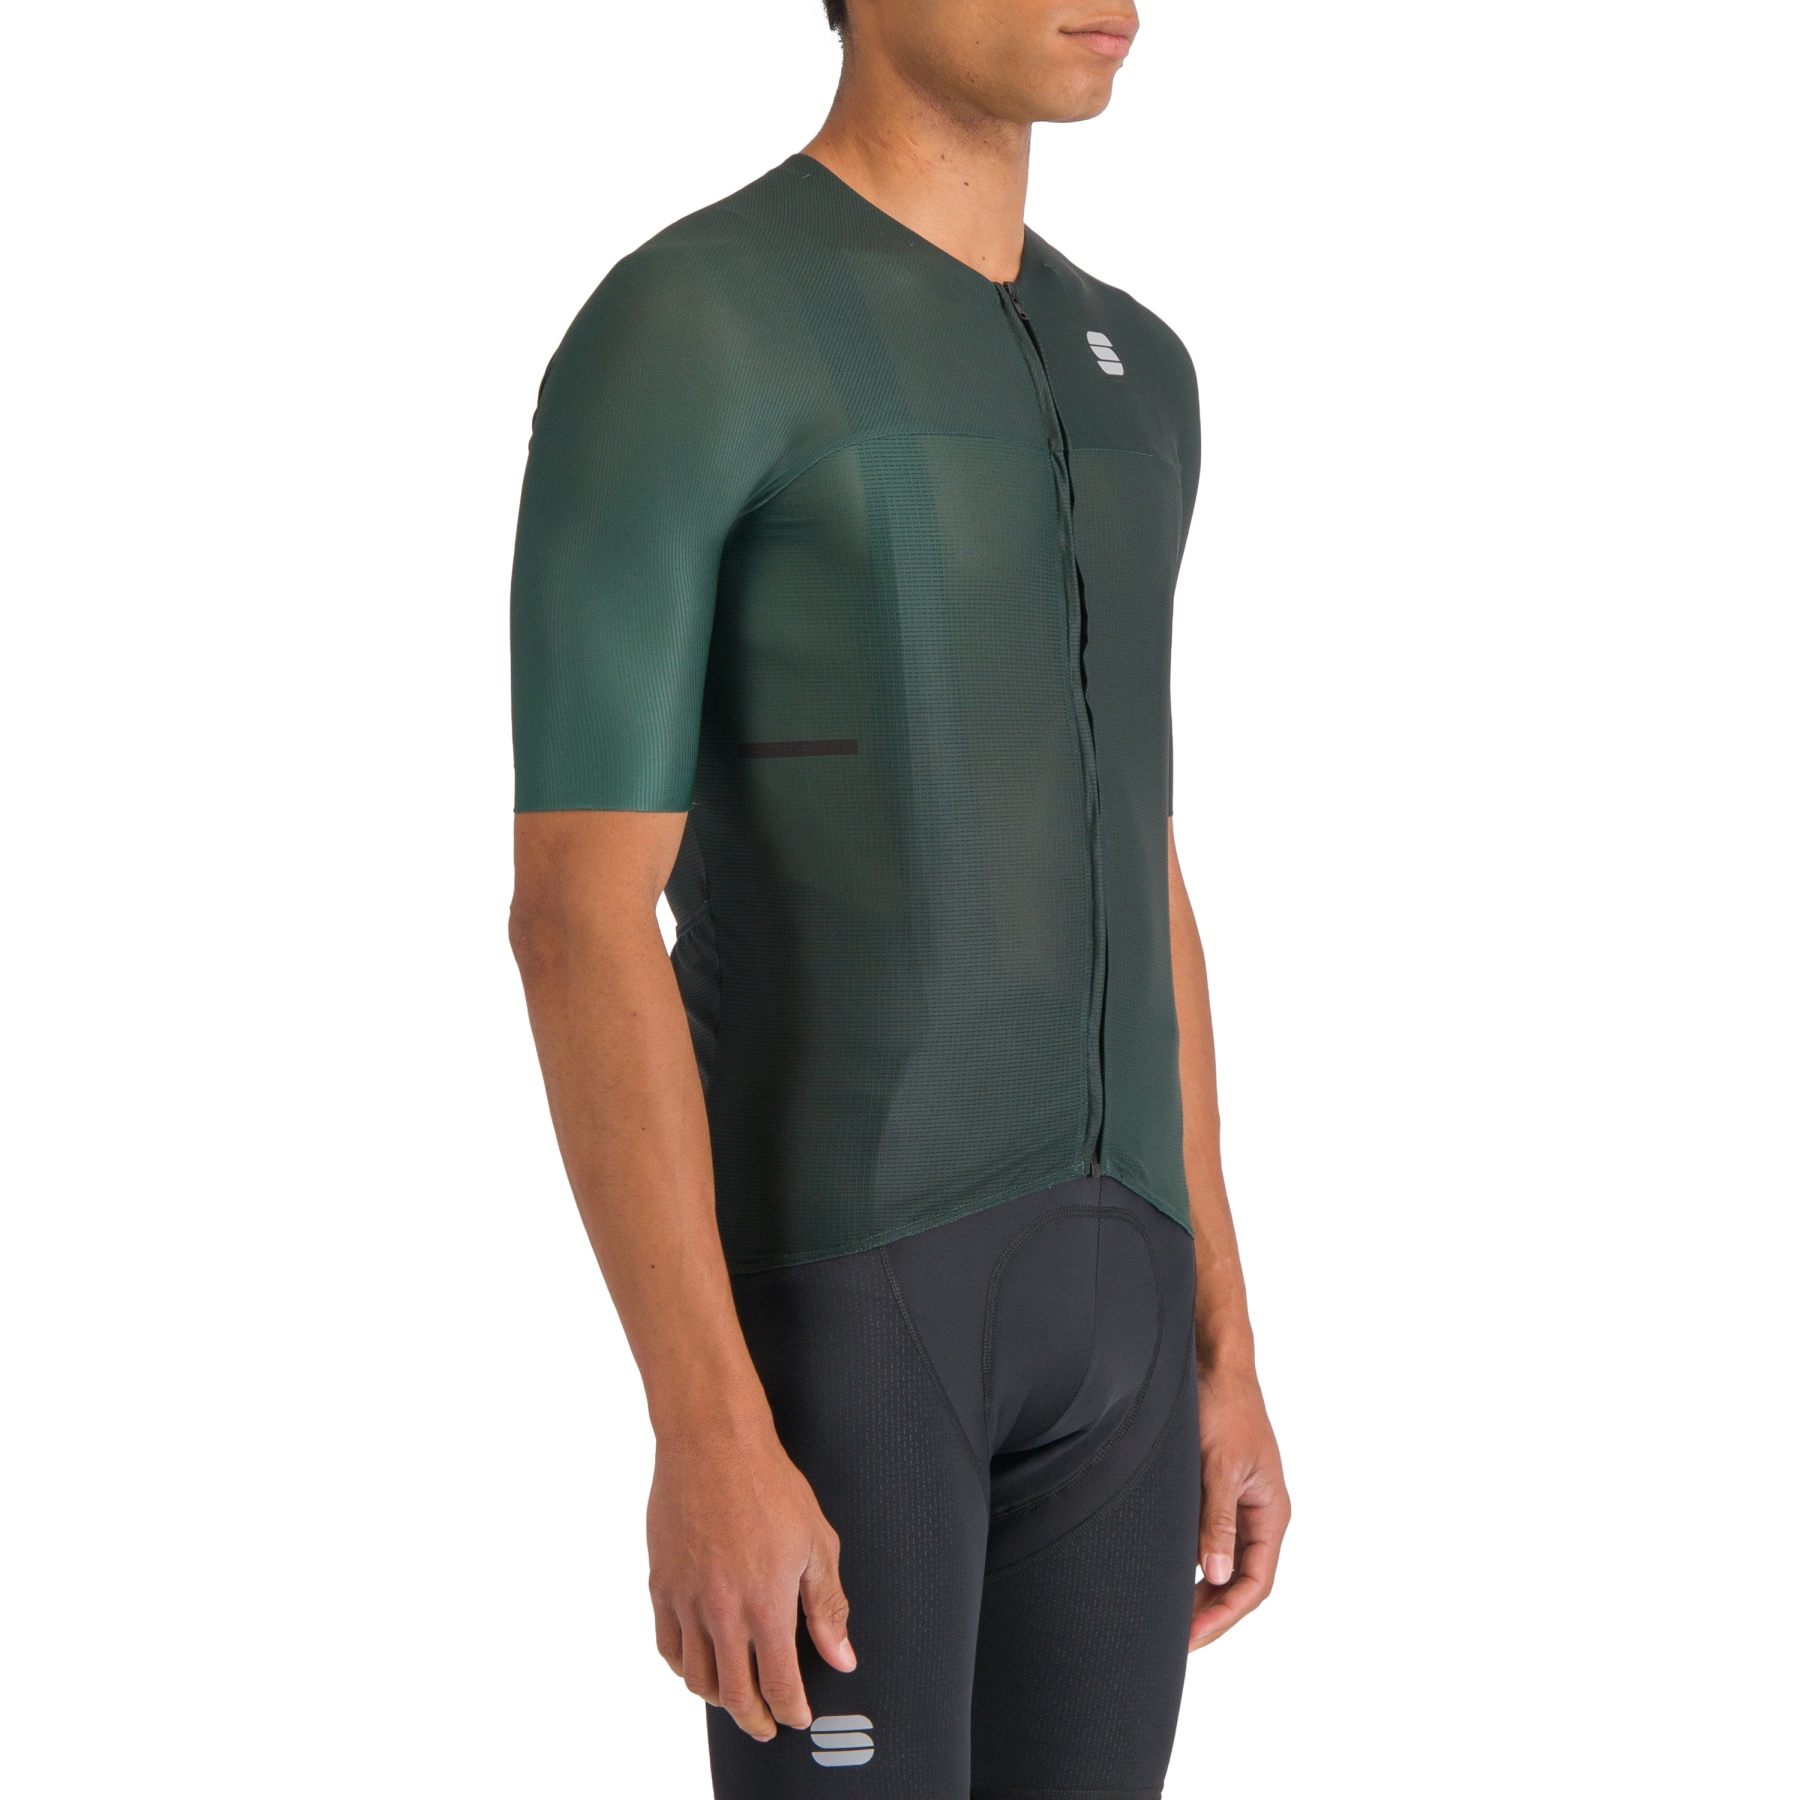 Picture of Sportful Light Jersey - 3000 Shrub Green